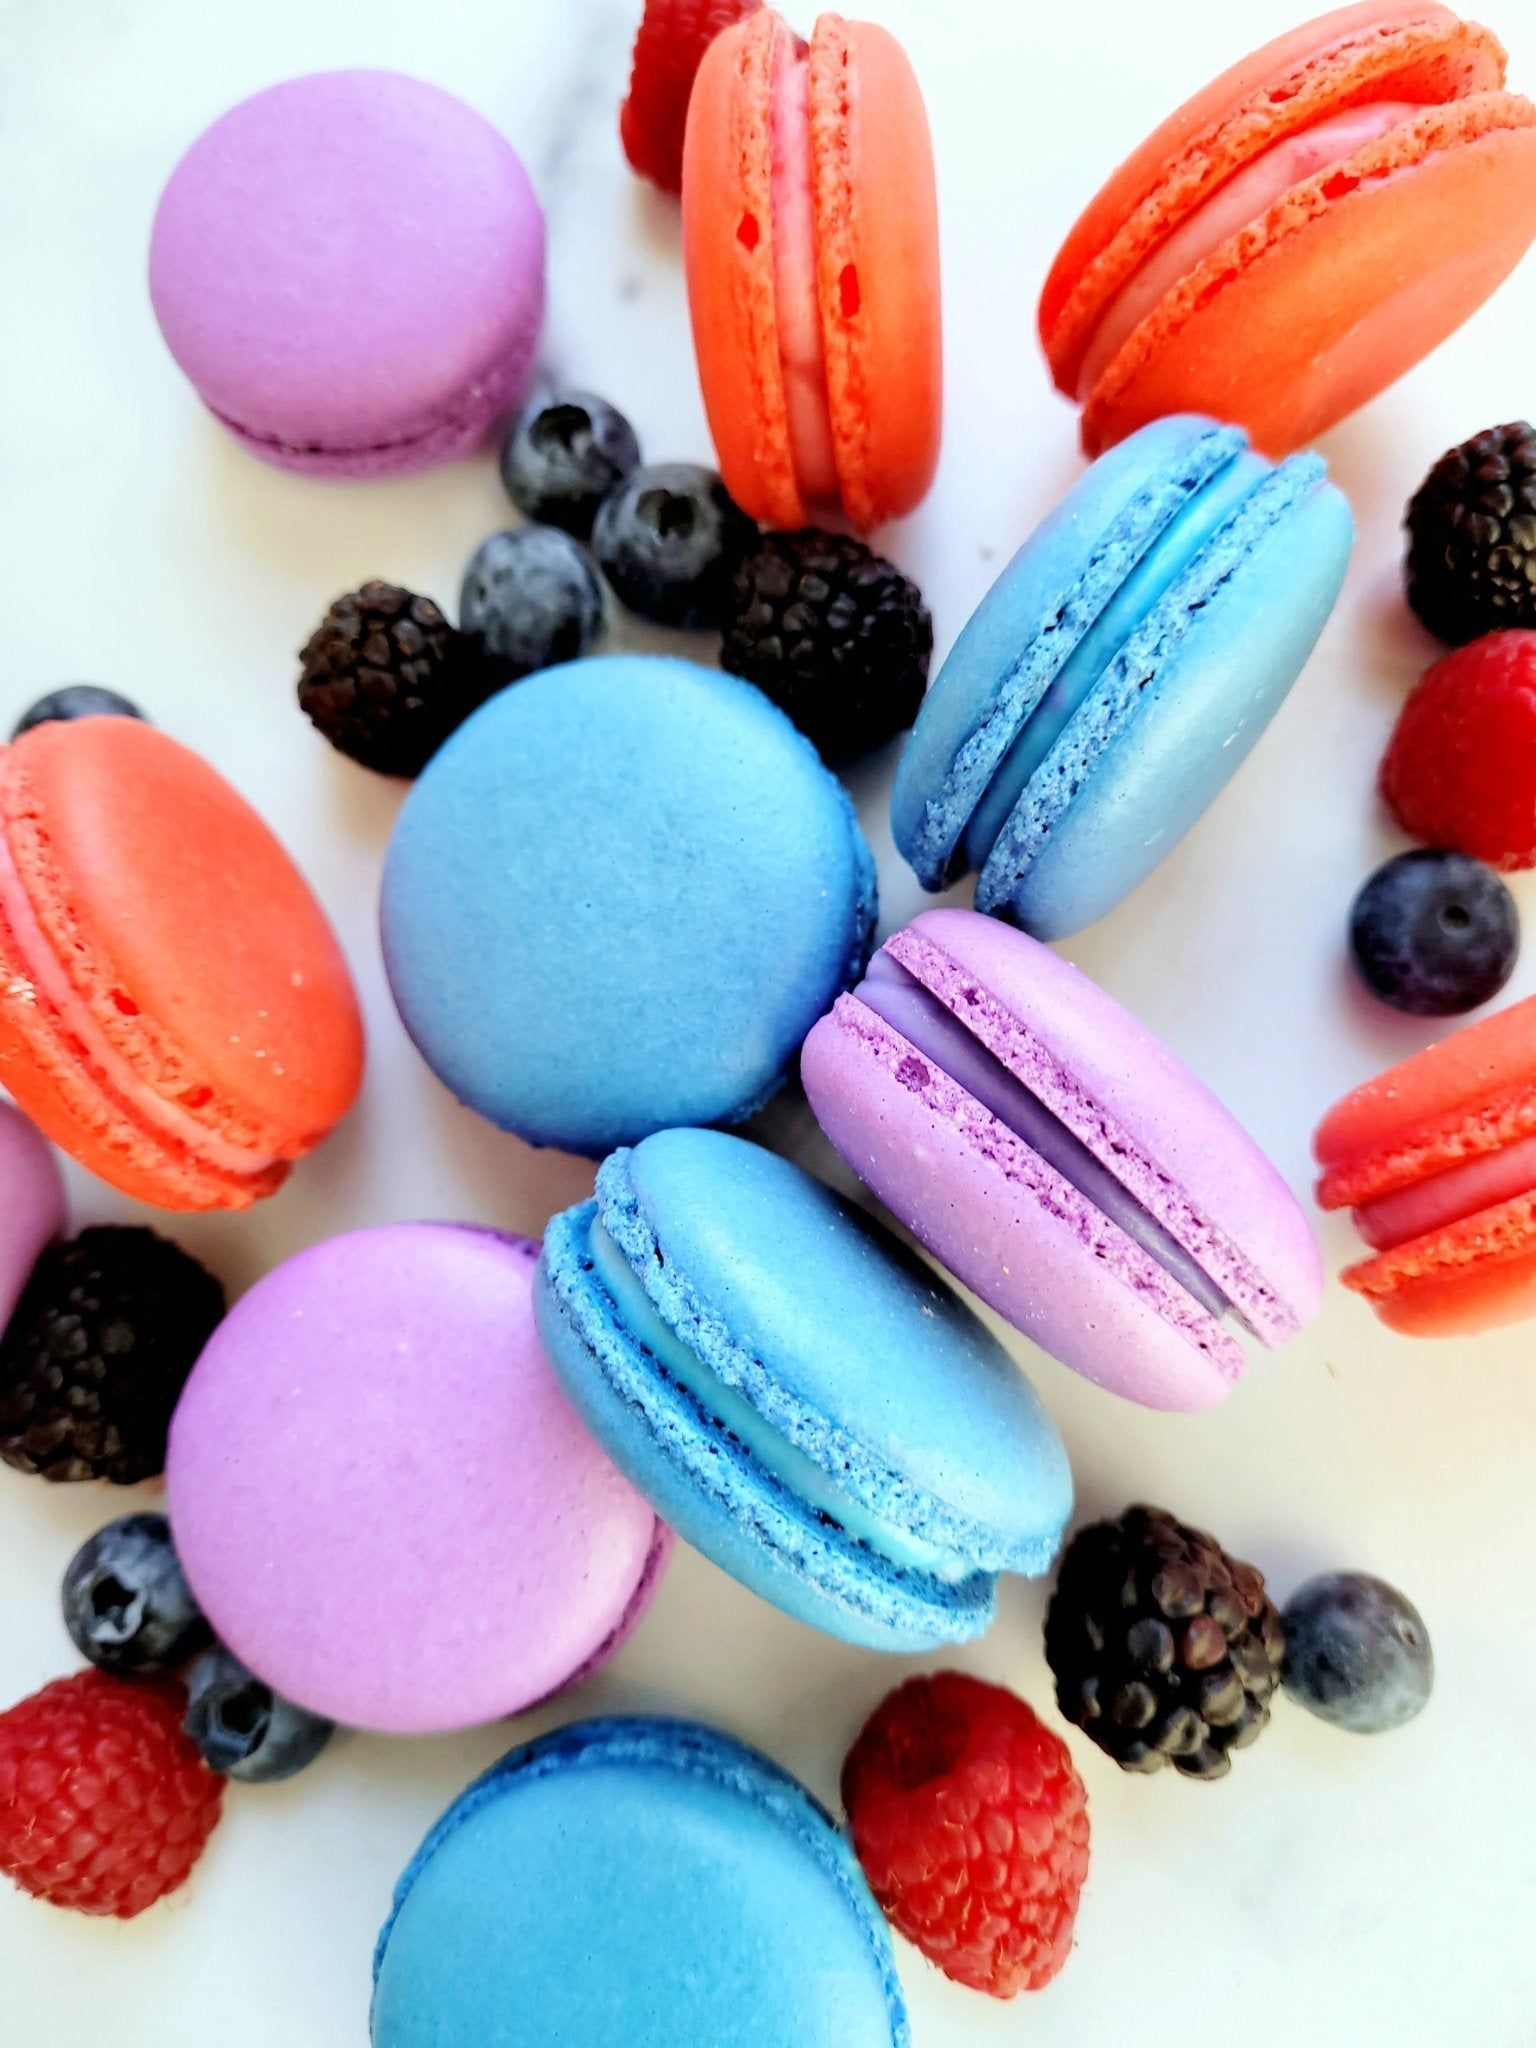 A plate of colorful macarons and berries - Bakery